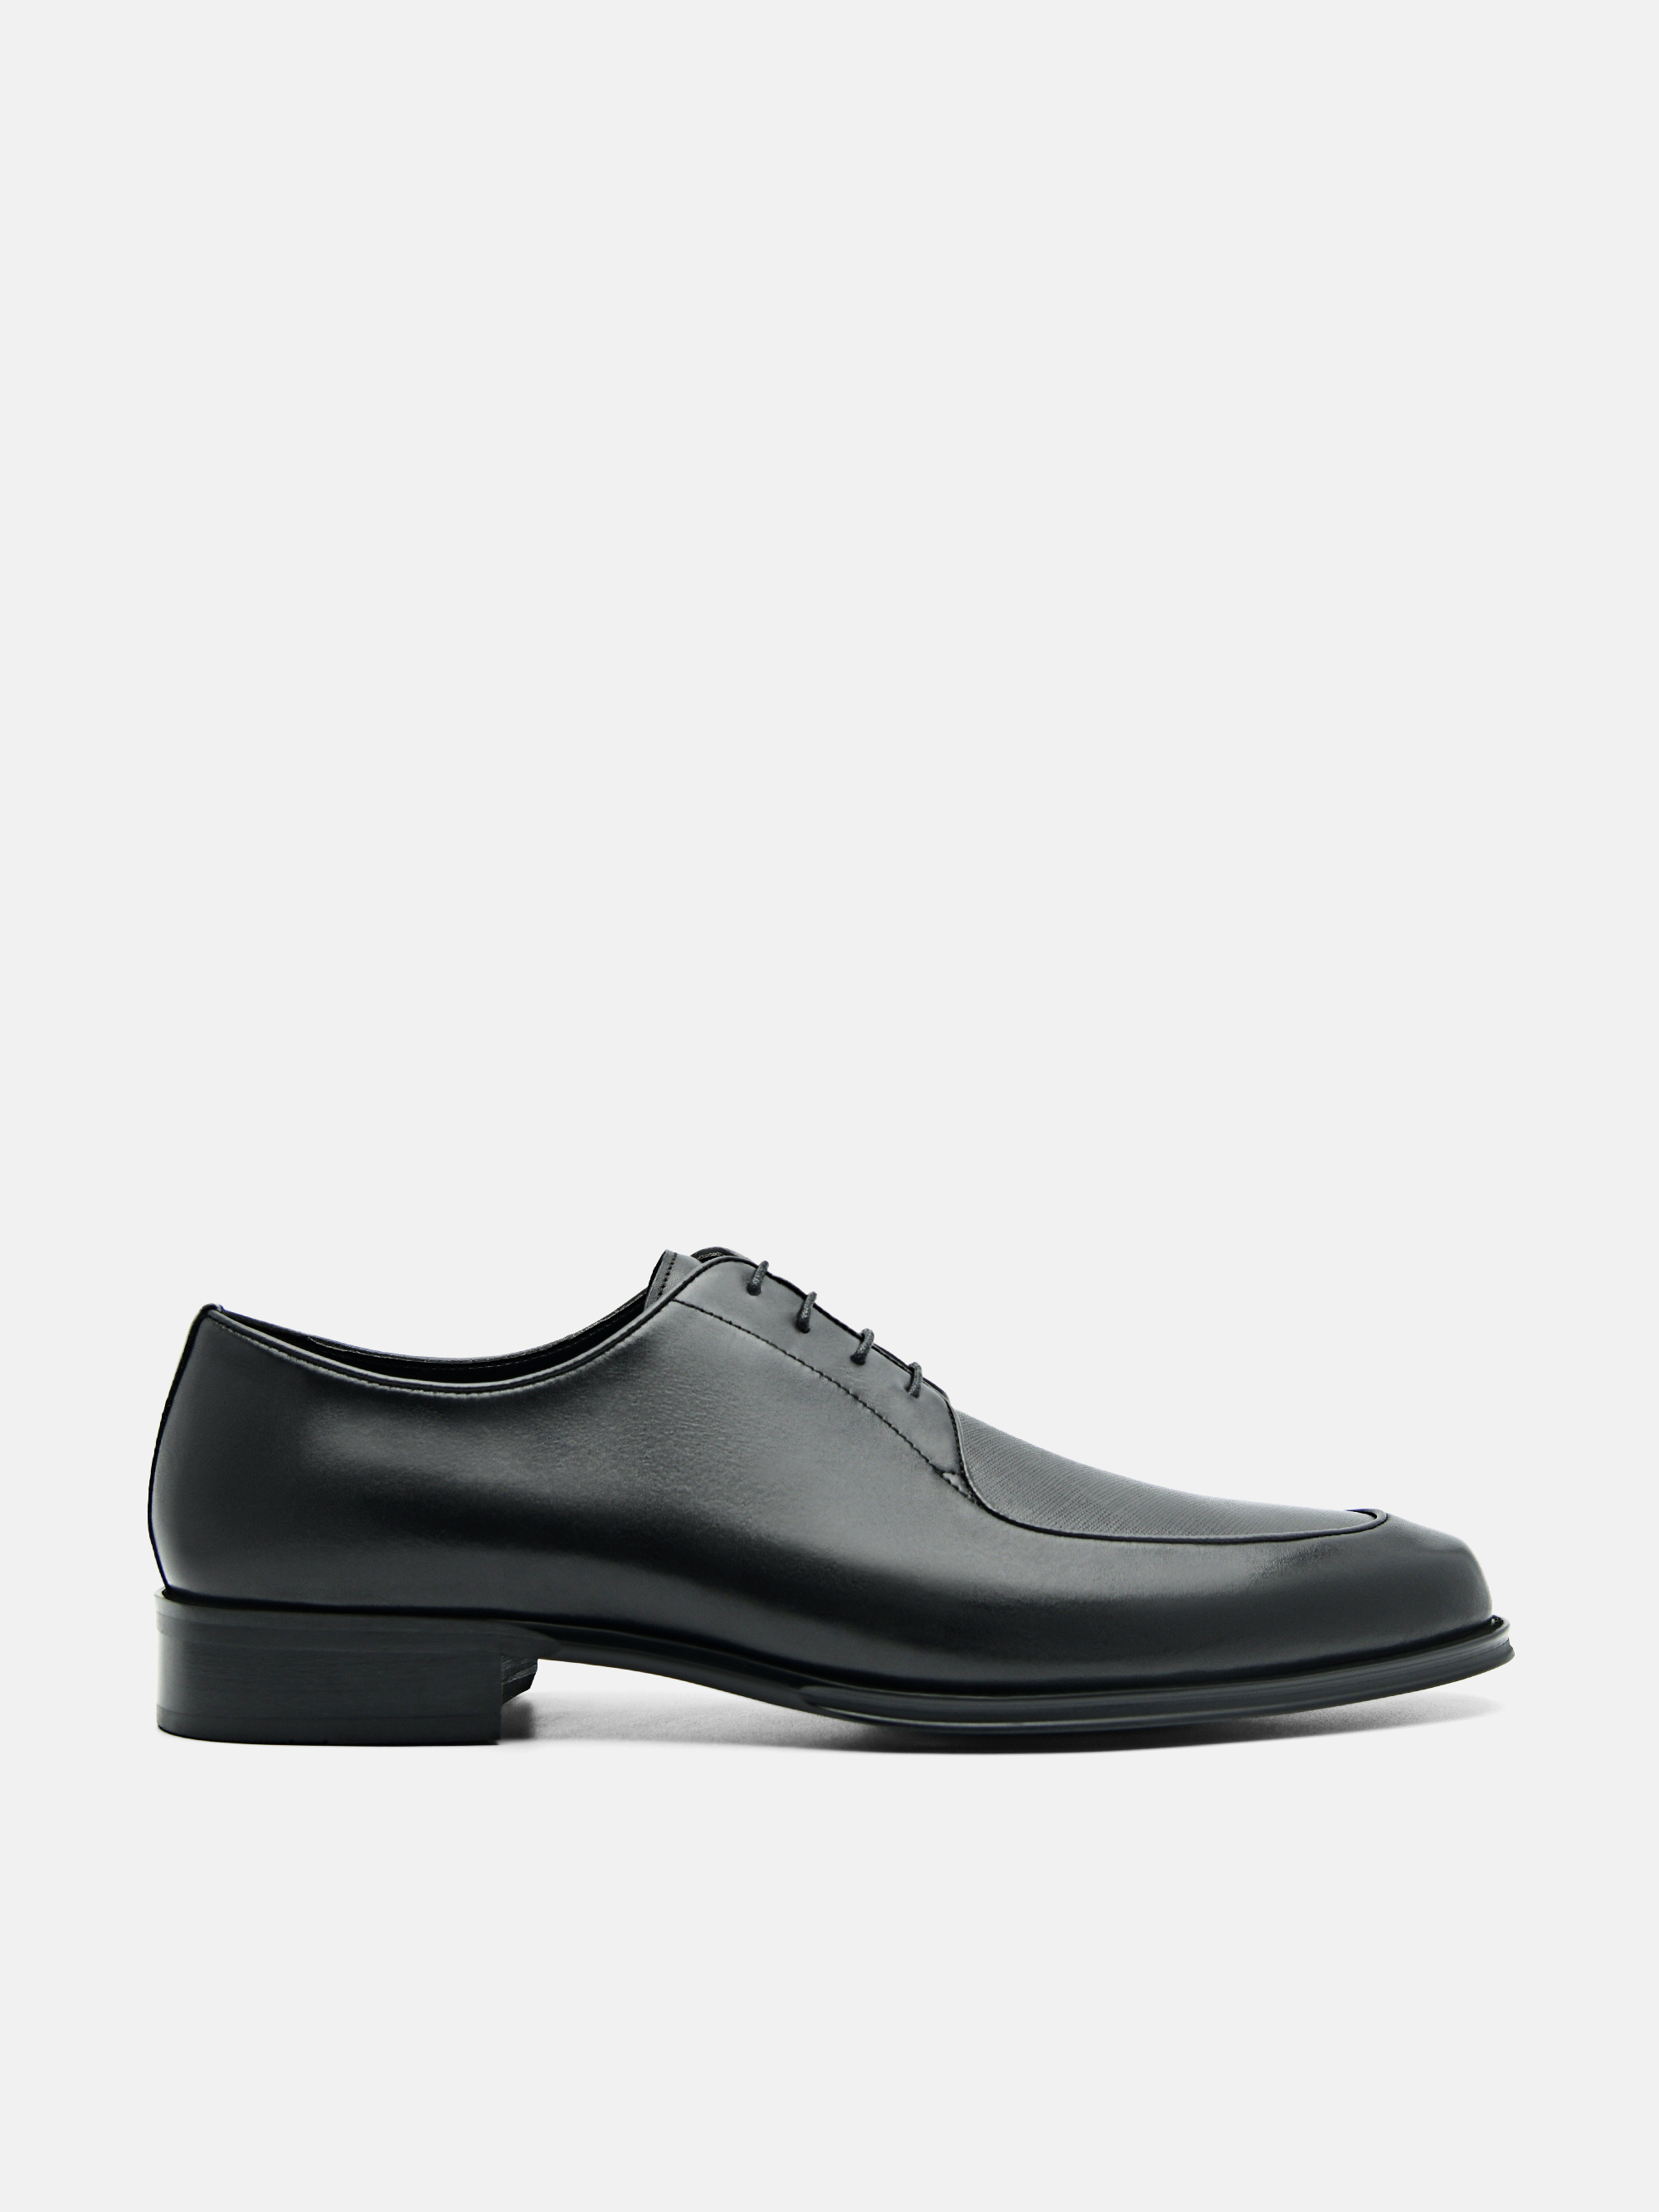 Leather Derby Shoes - PEDRO SG